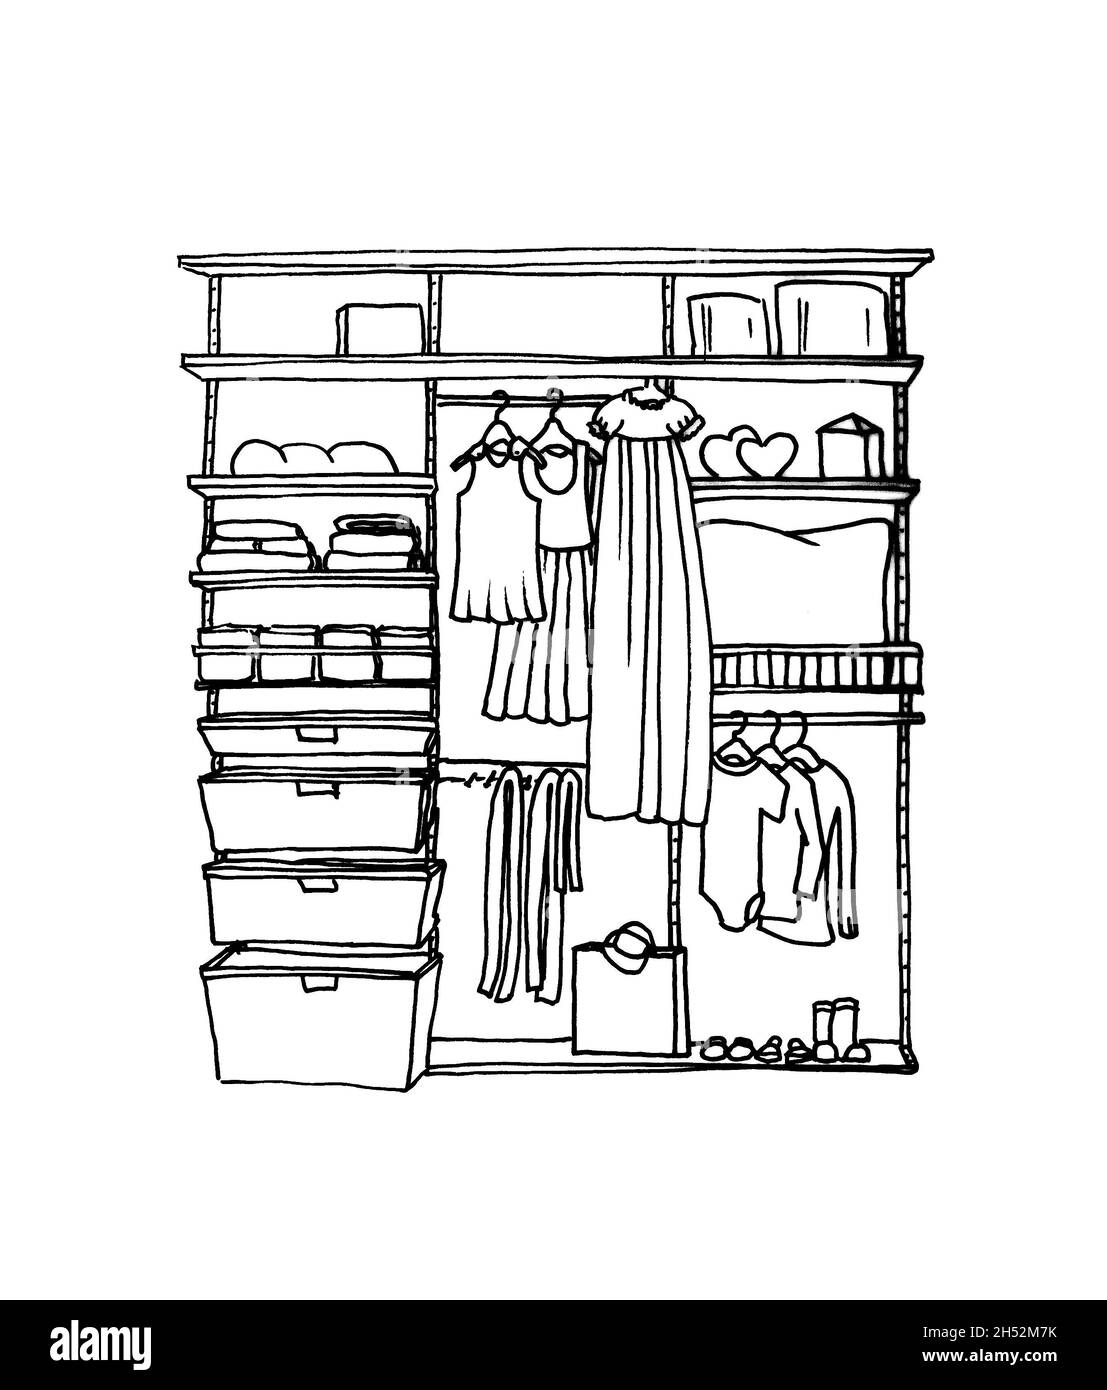 Graphical sketch of children's wardrobe with shelves and hangers Stock Photo